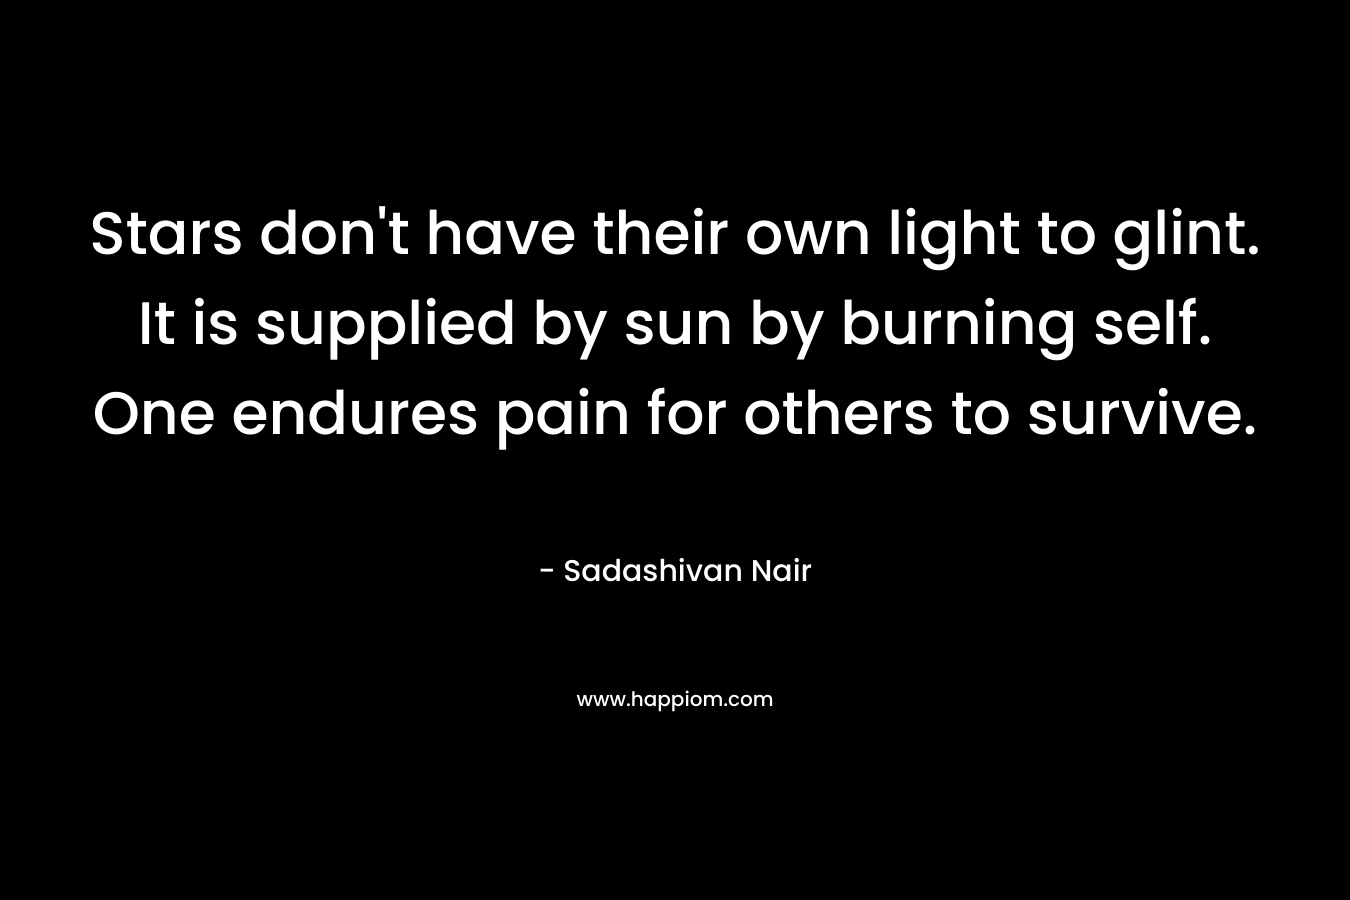 Stars don’t have their own light to glint. It is supplied by sun by burning self. One endures pain for others to survive. – Sadashivan Nair